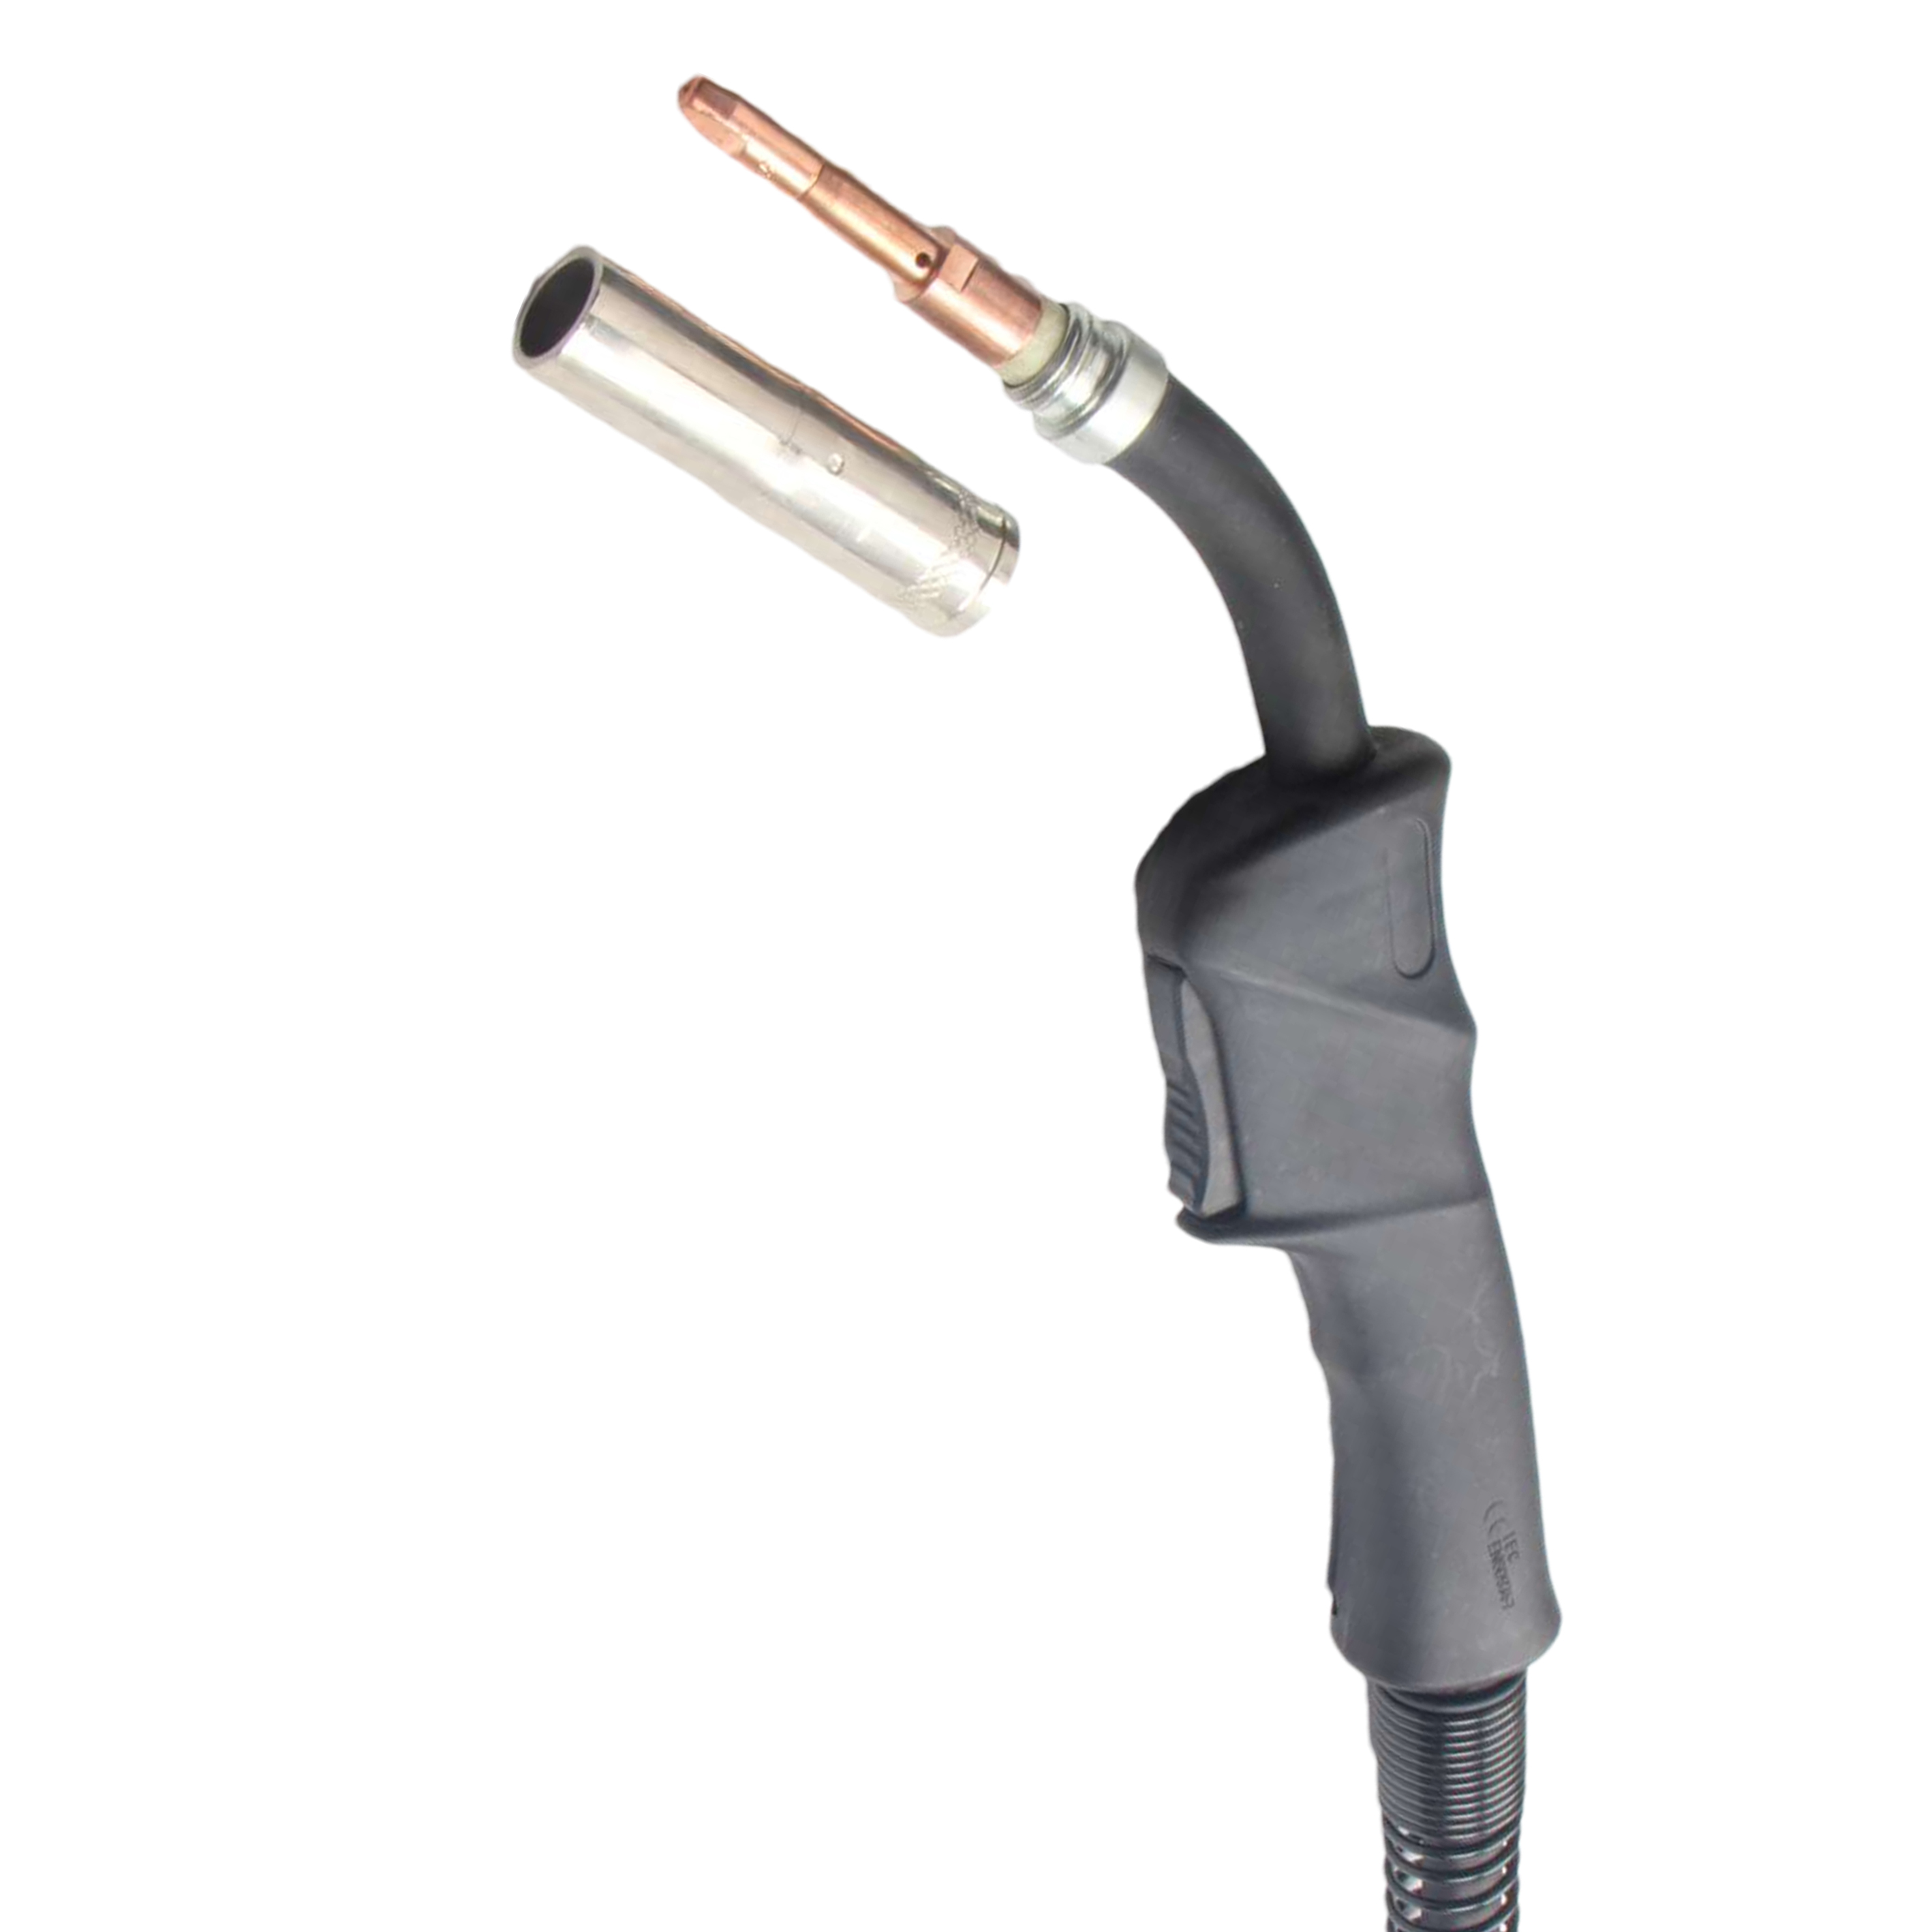 PSF250 Gas Cooled Mig Welding Torch - Changzhou Inwelt